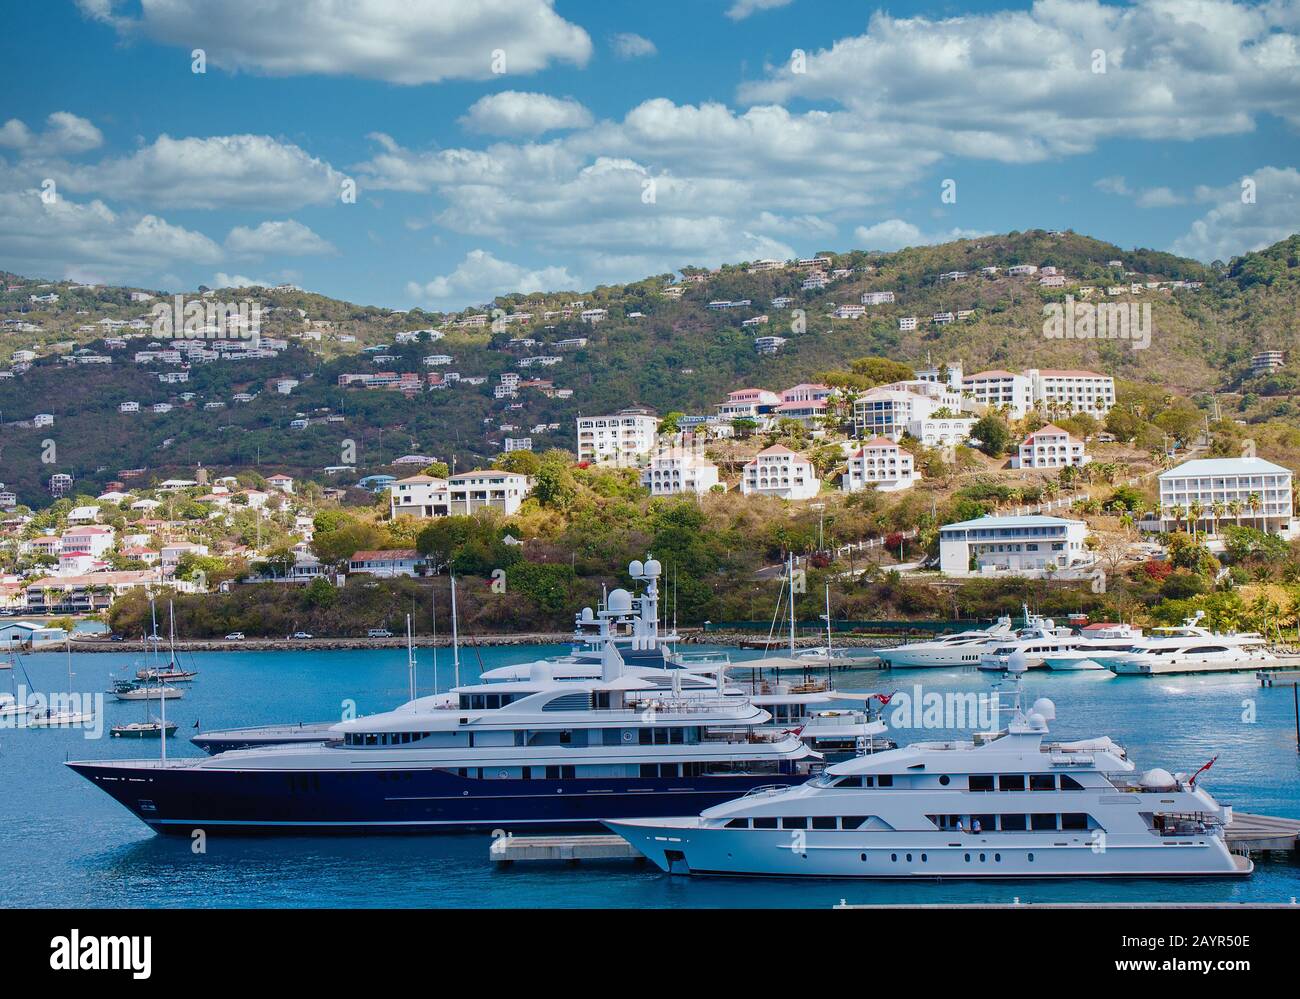 Luxury Blue and White Yachts at Caribbean Pier Stock Photo